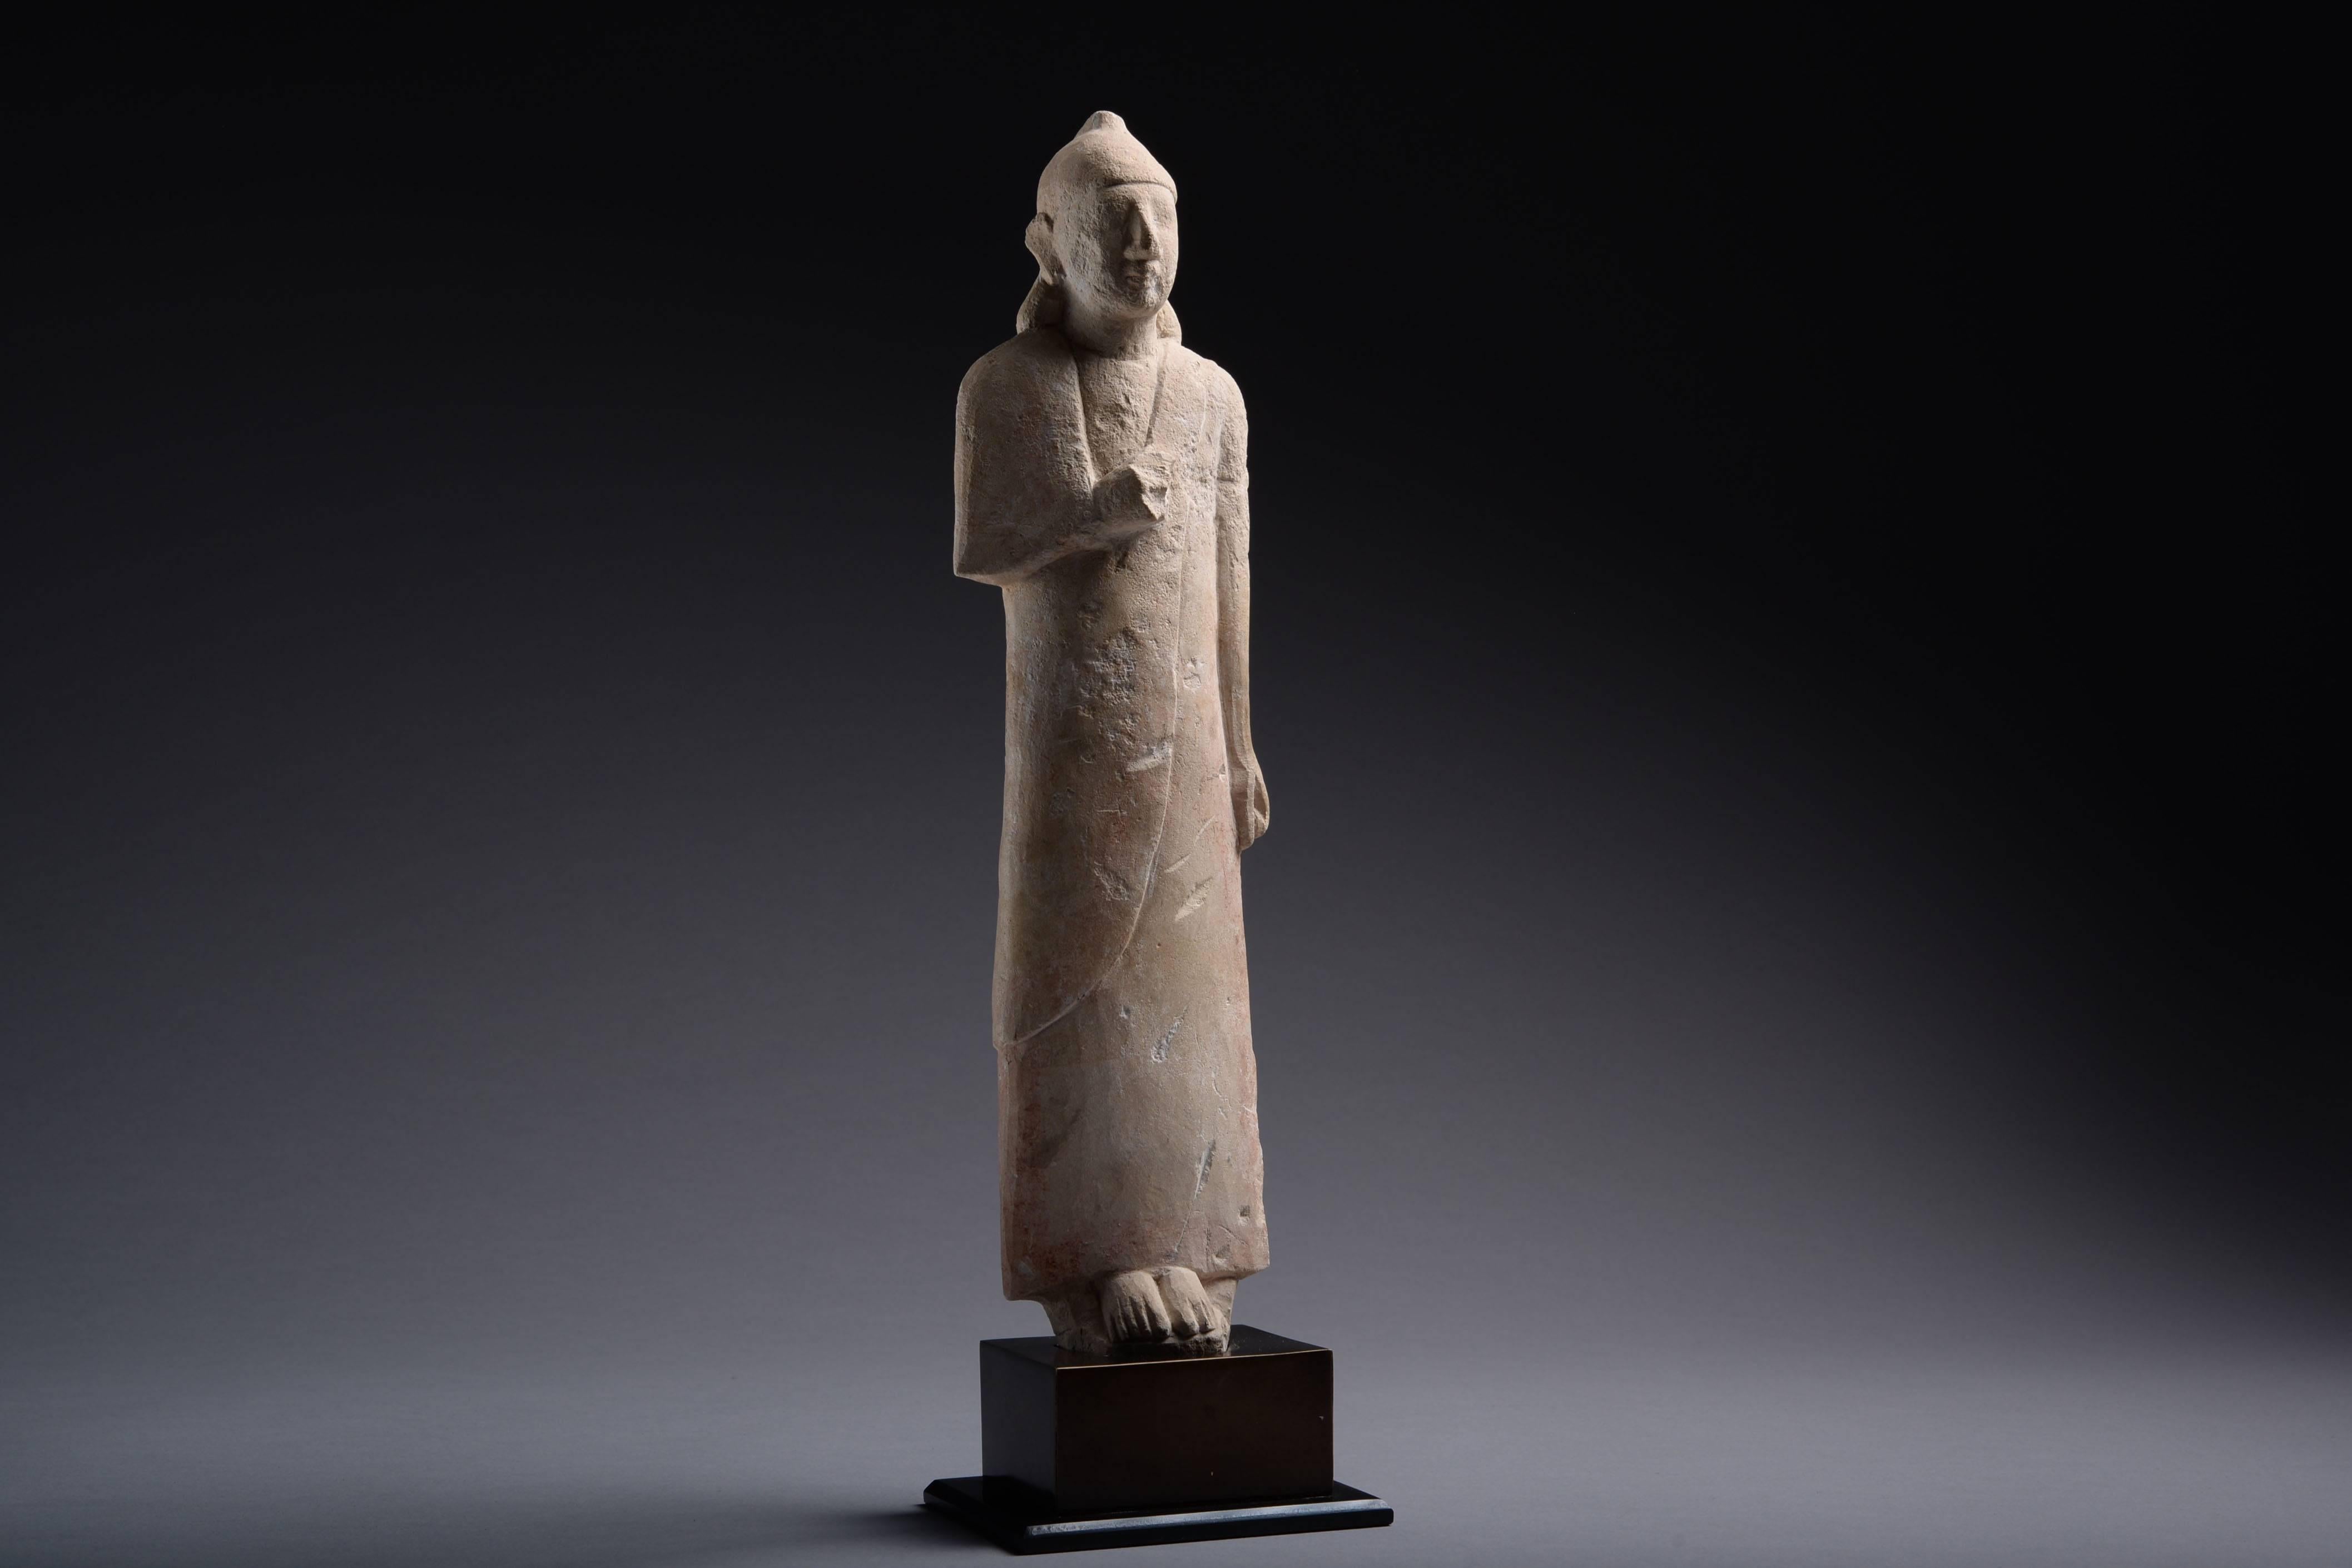 A limestone votive worshipper from Cyprus, dating to the Cypro Archaic Period, circa 600 BC. 

The male figure is shown standing tall, wearing a long tunic, his right hand folded over his chest, his left by his side, his hair pushed back over his